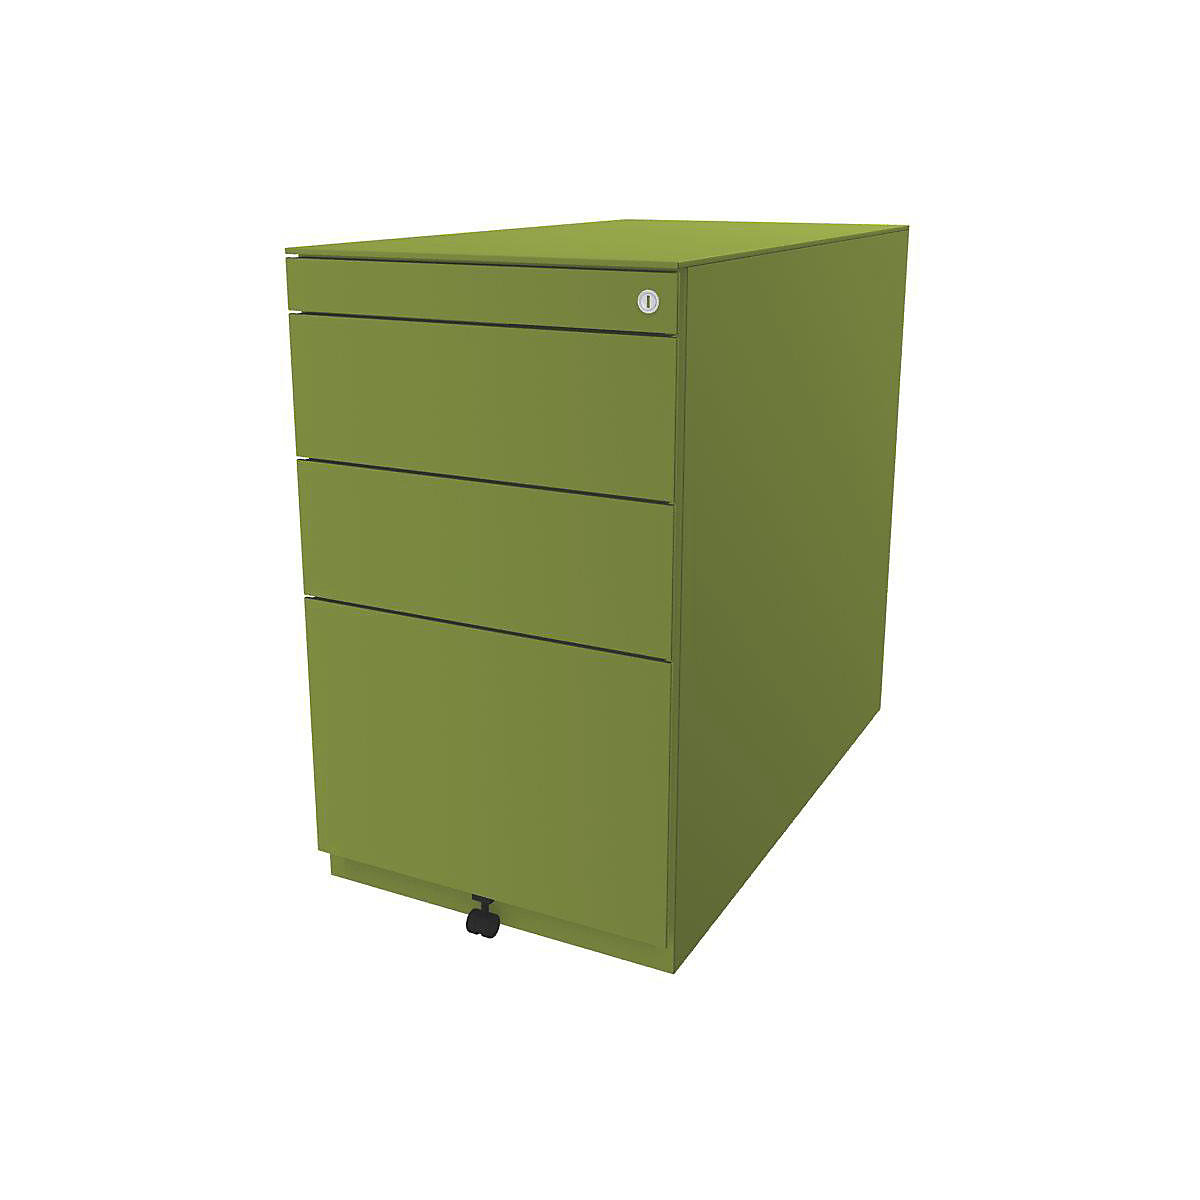 Note™ fixed pedestal, with 2 universal drawers, 1 suspension file drawer – BISLEY, with top, depth 775 mm, green-12